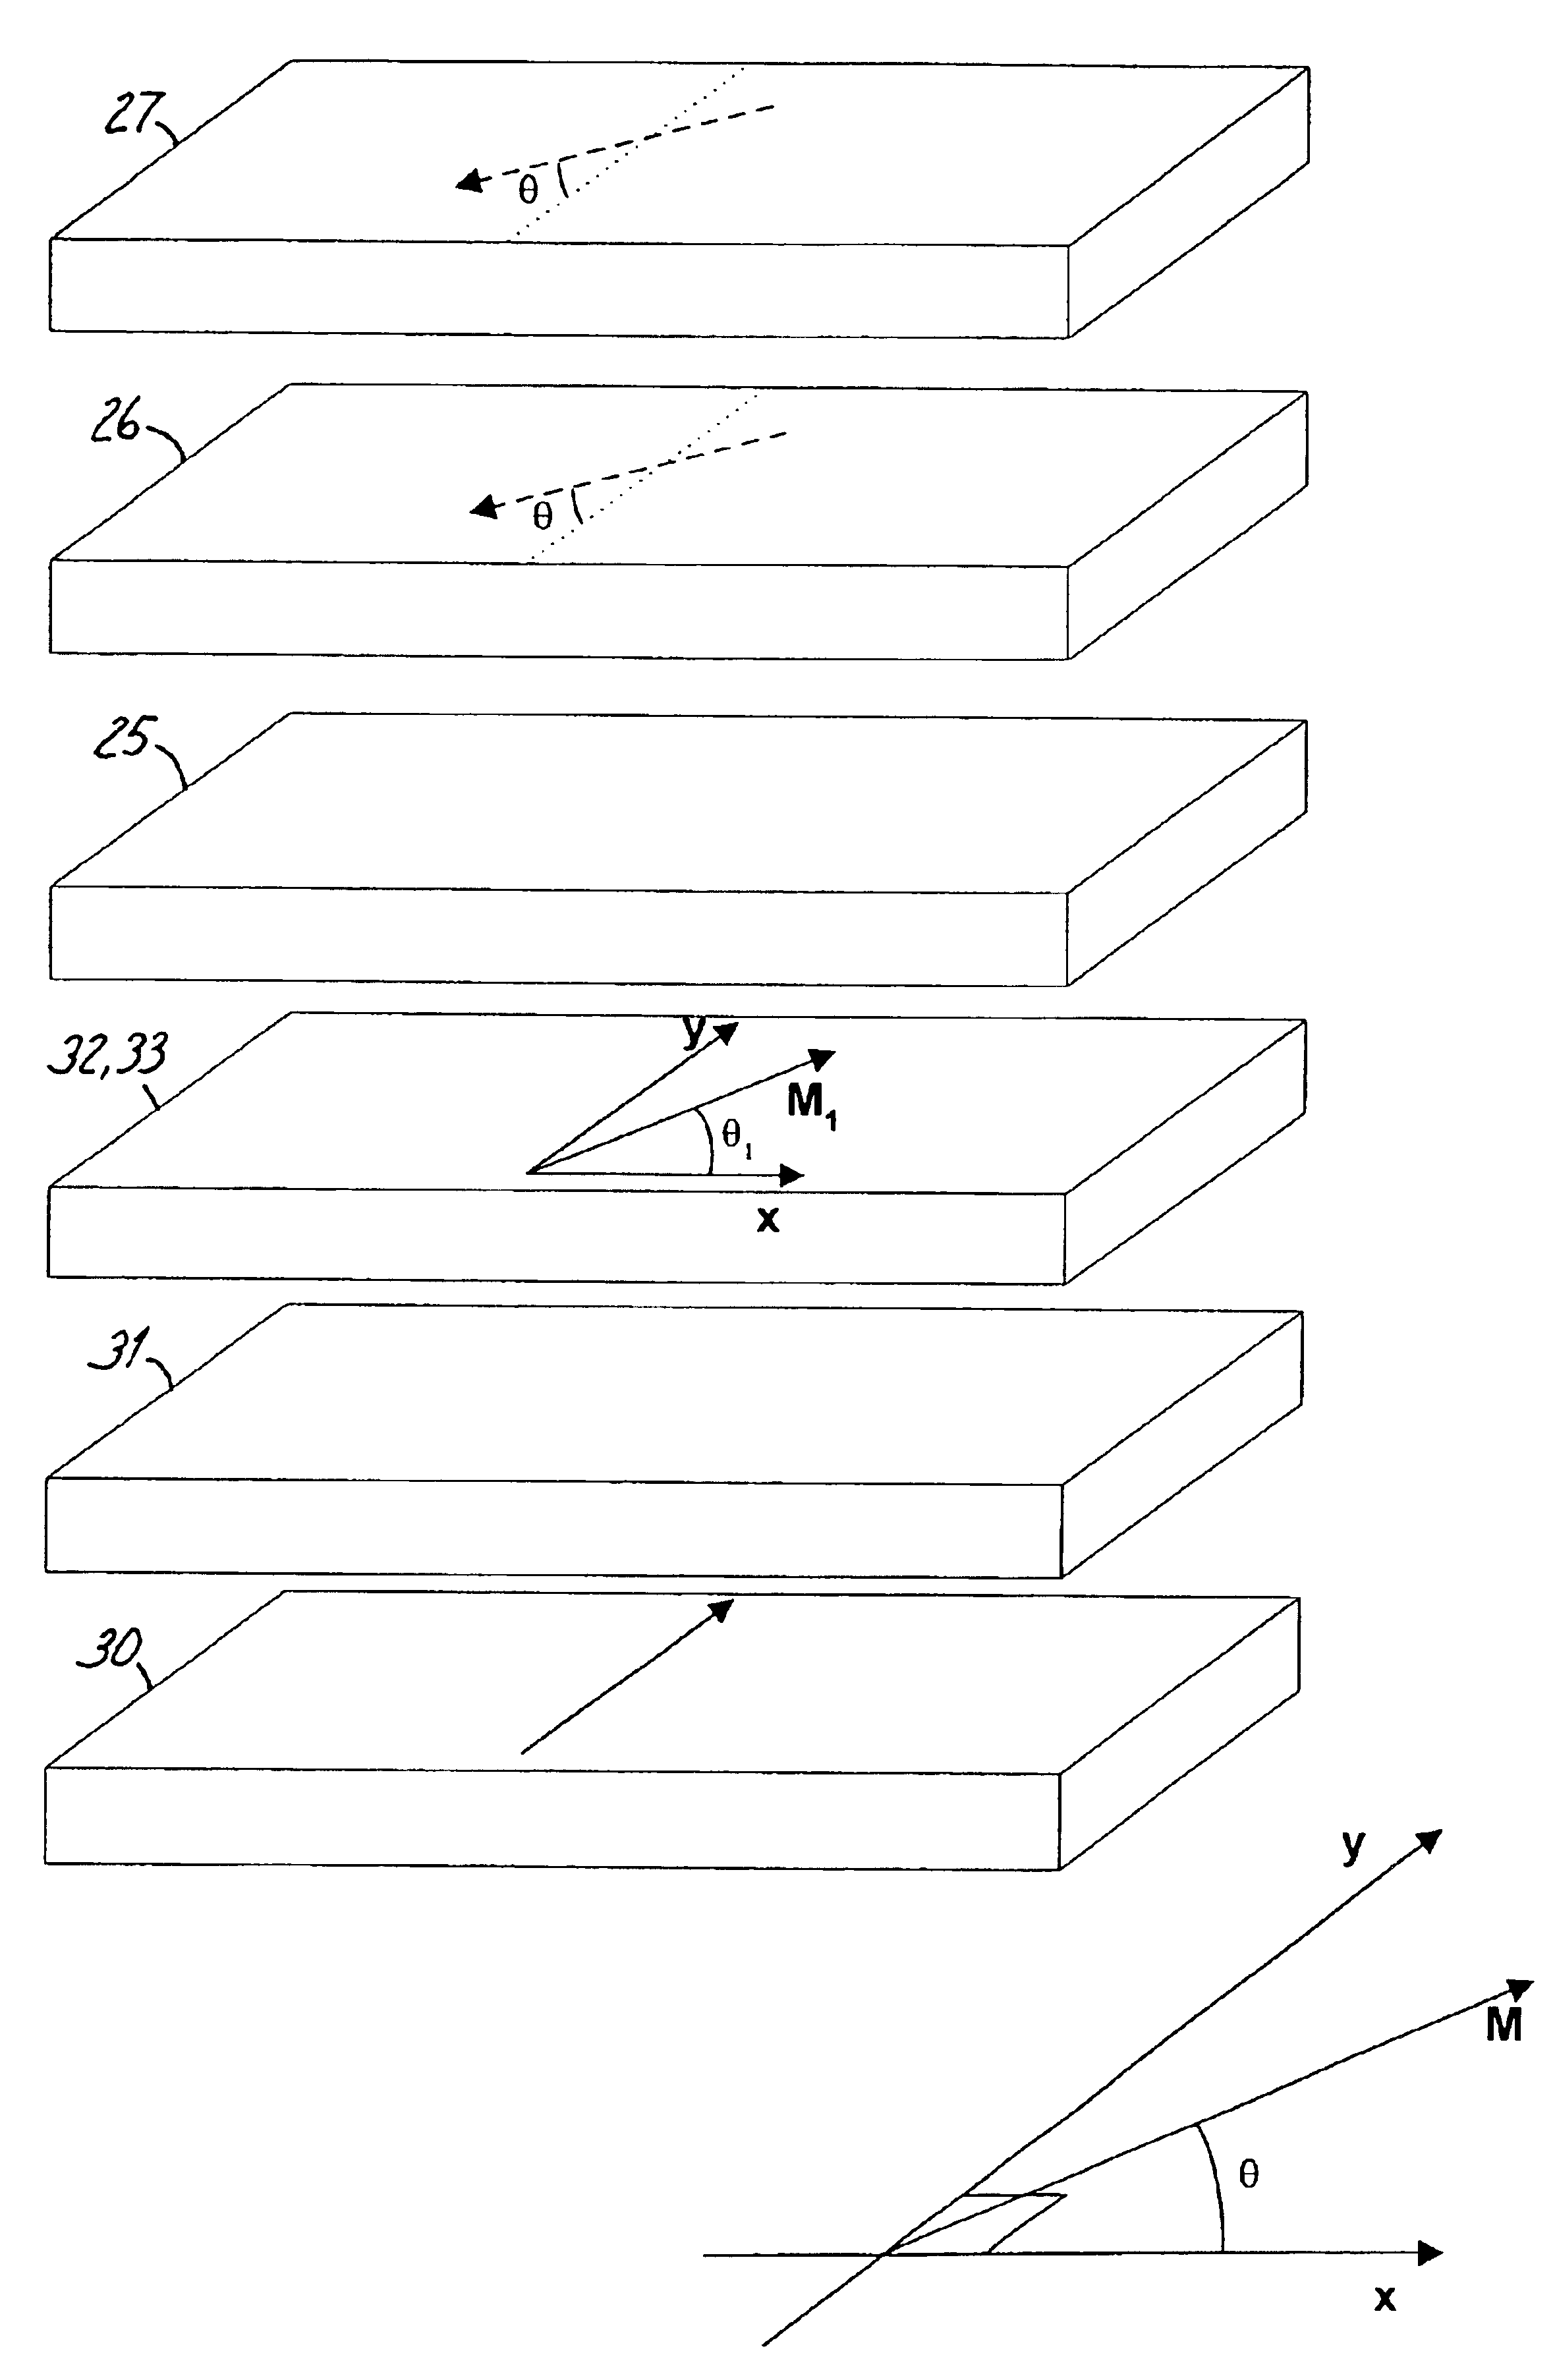 Magnetic field sensor with augmented magnetoresistive sensing layer